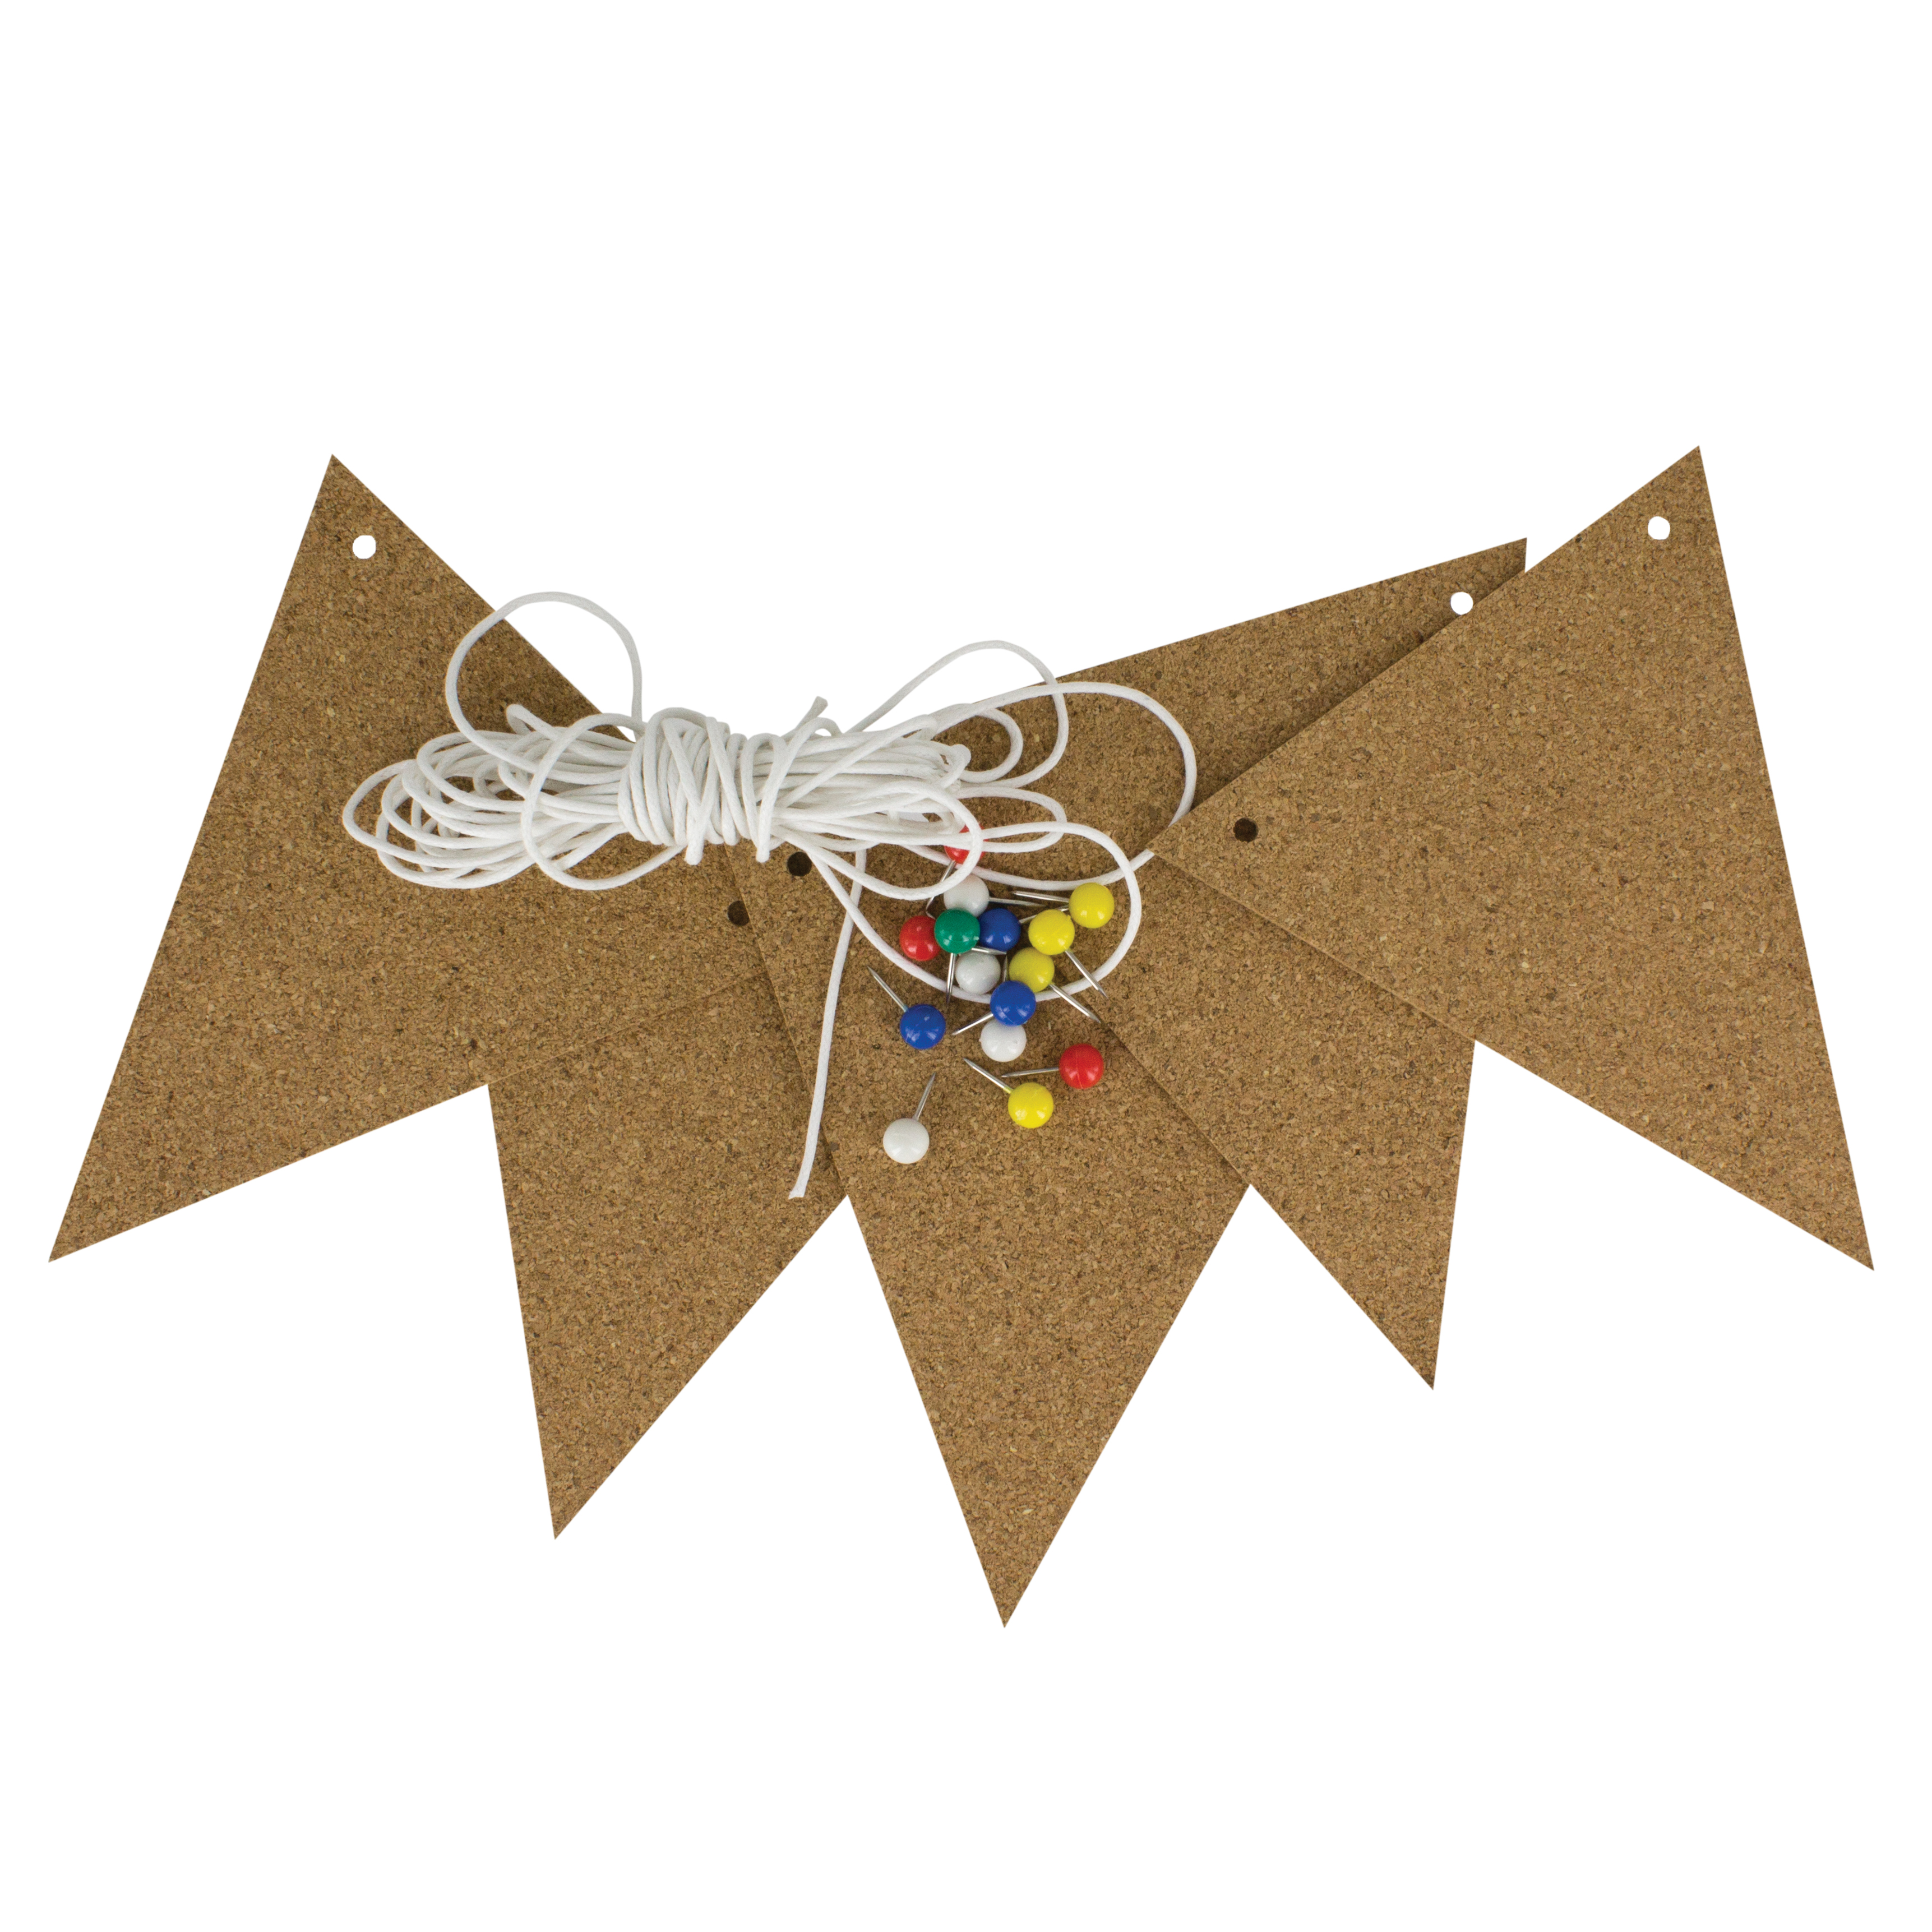 Two-Pack of Cork Bunting with Free Delivery